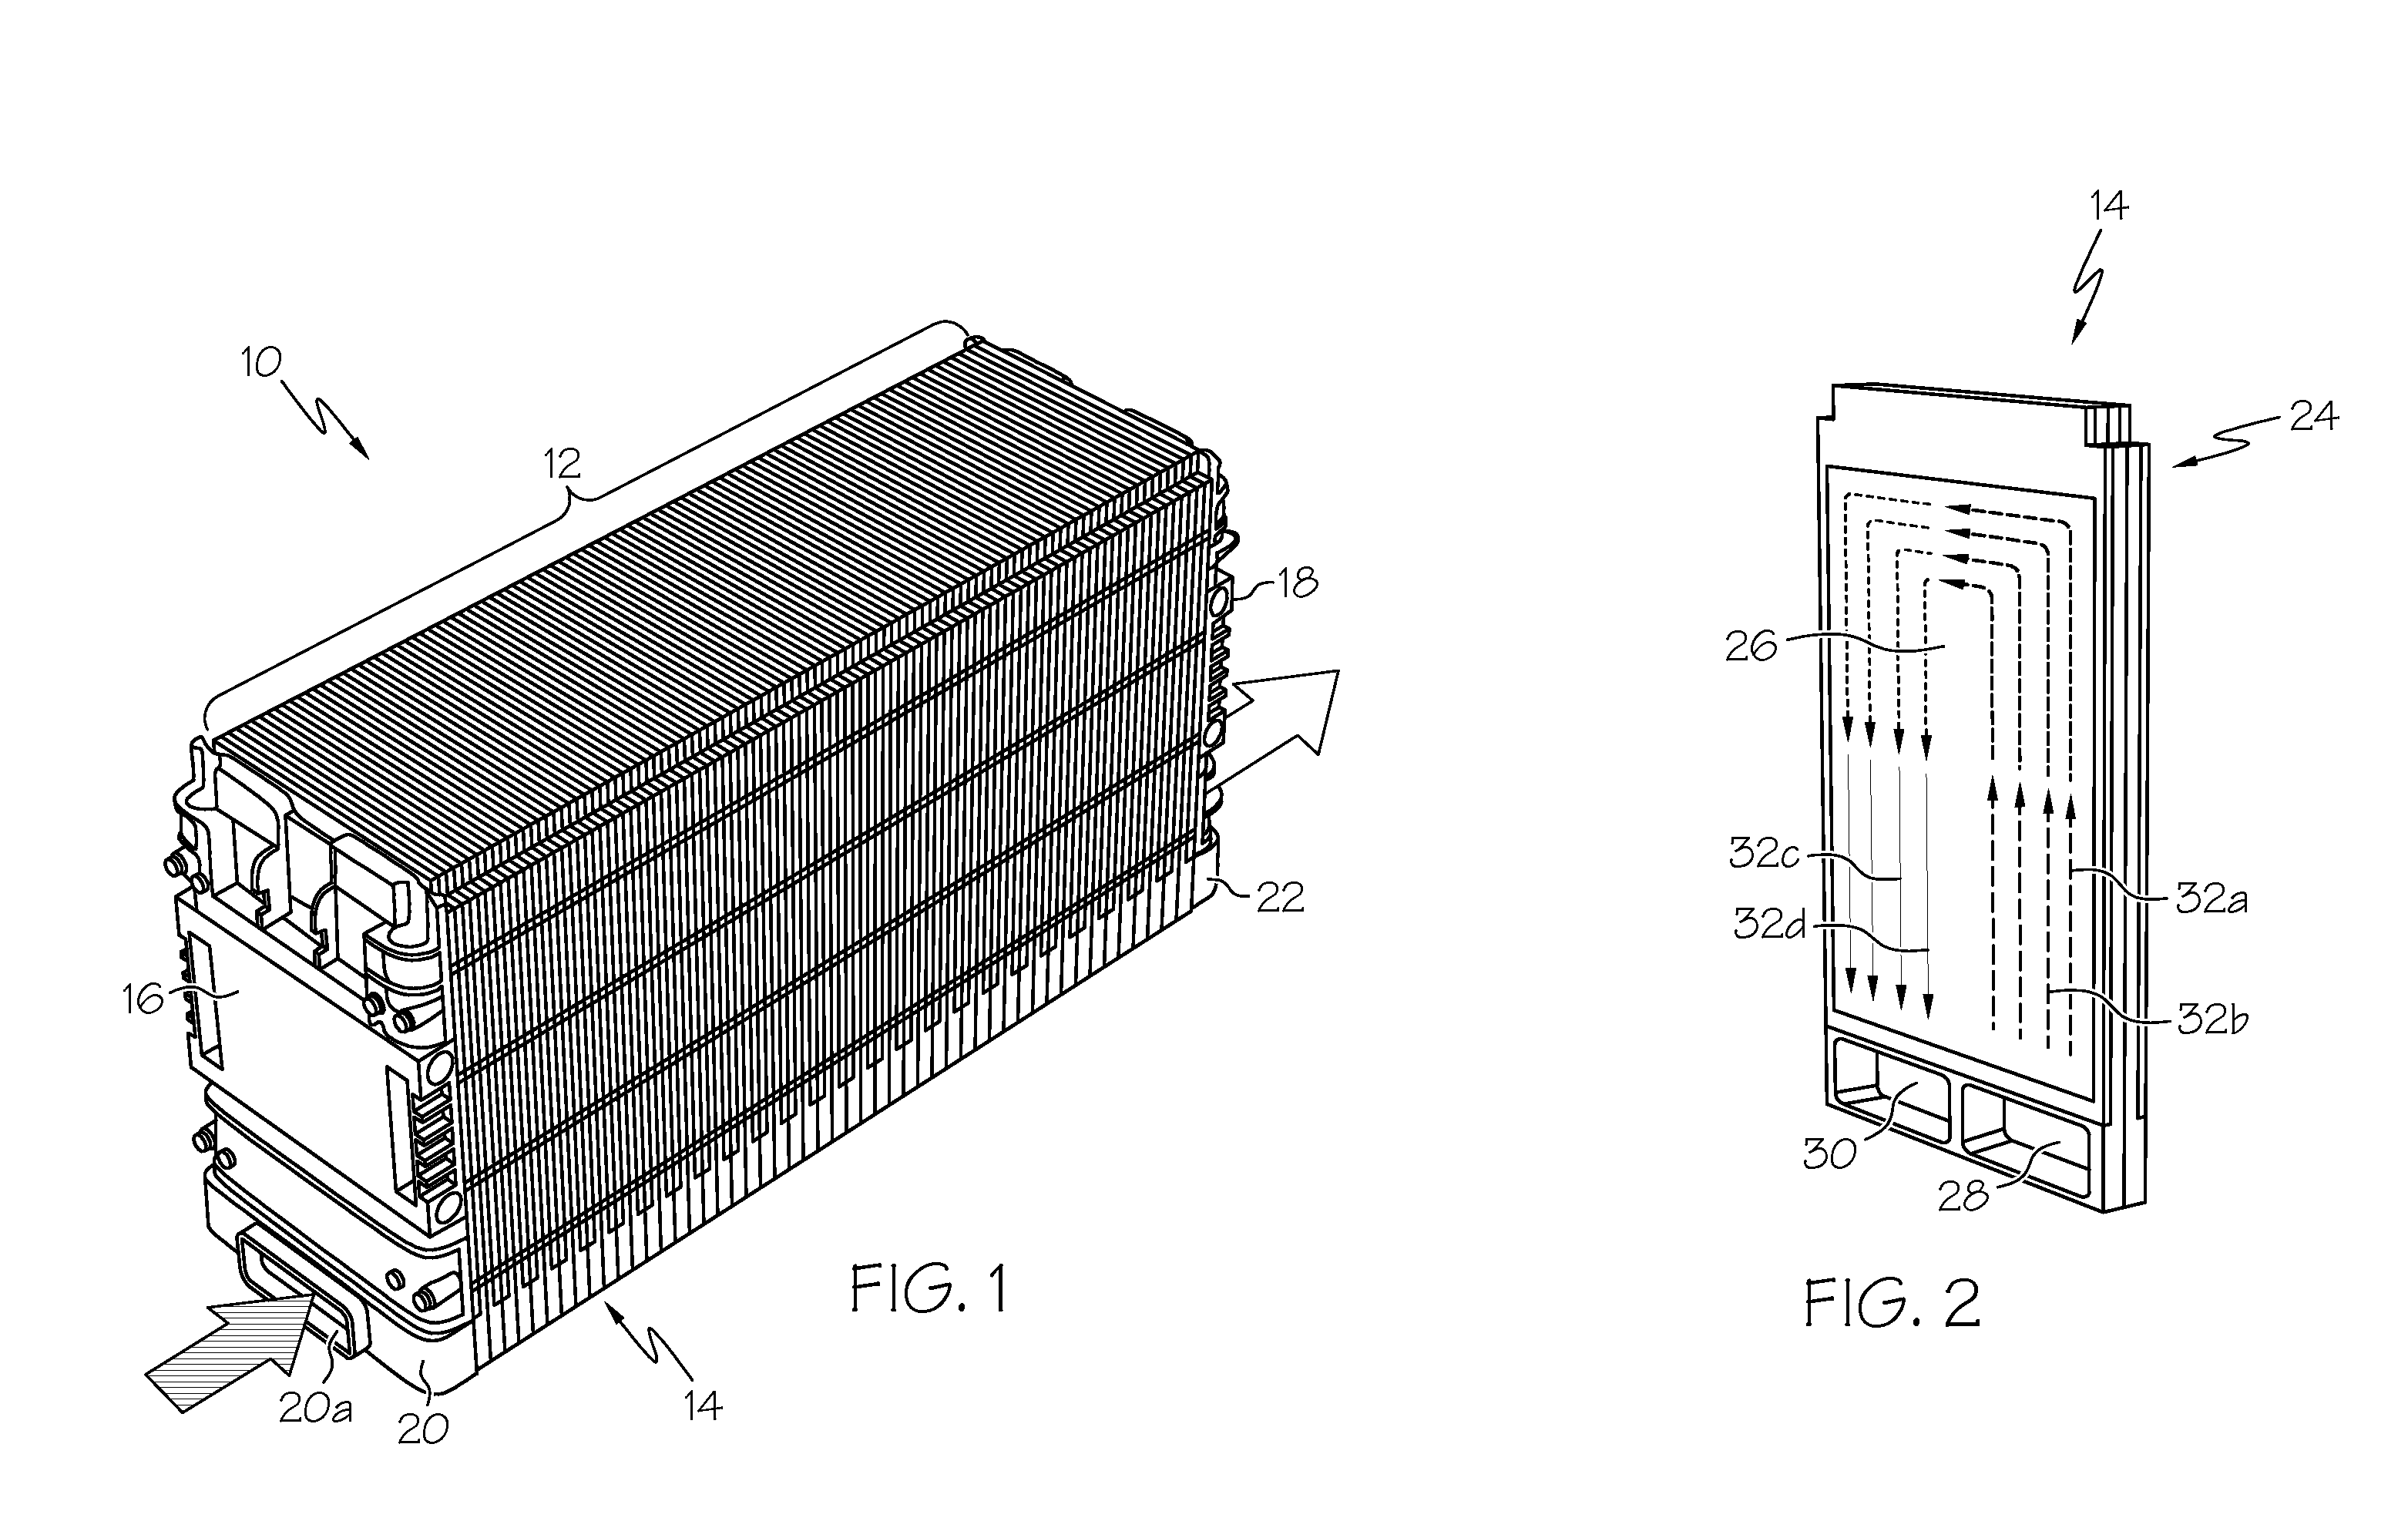 Prismatic-cell battery pack with integral coolant passages